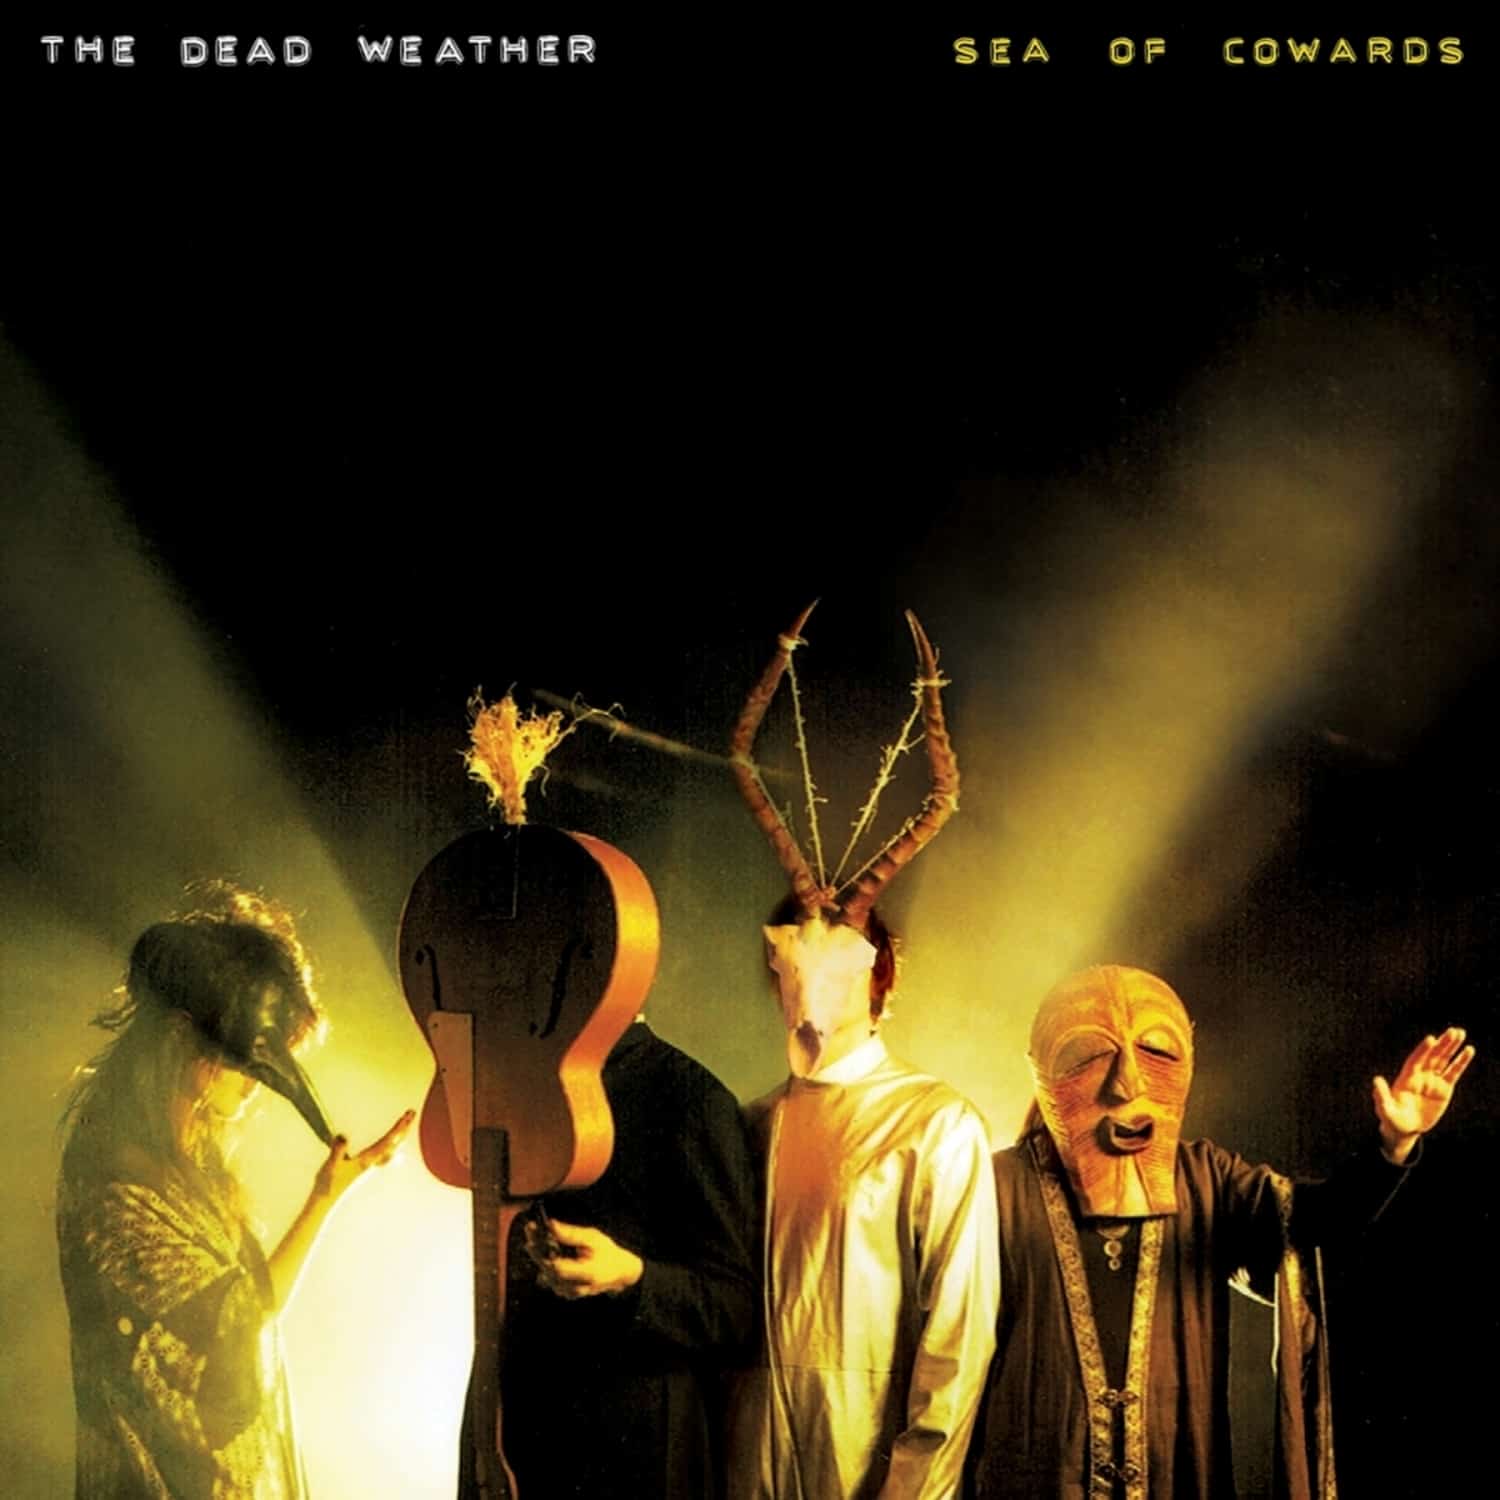 The Dead Weather - SEA OF COWARDS 